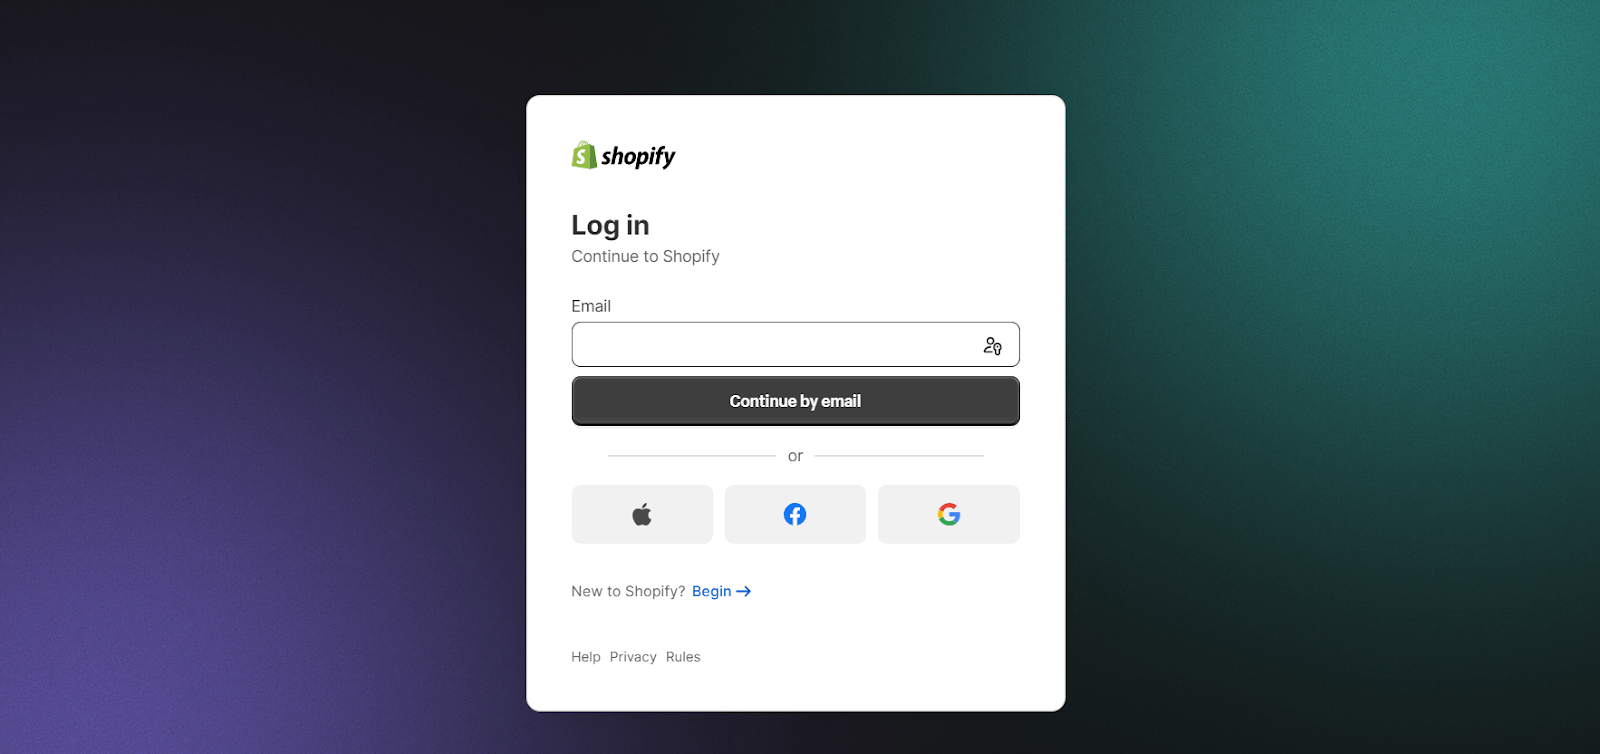 Access Shopify Admin Dashboard and Log into your Shopify store.